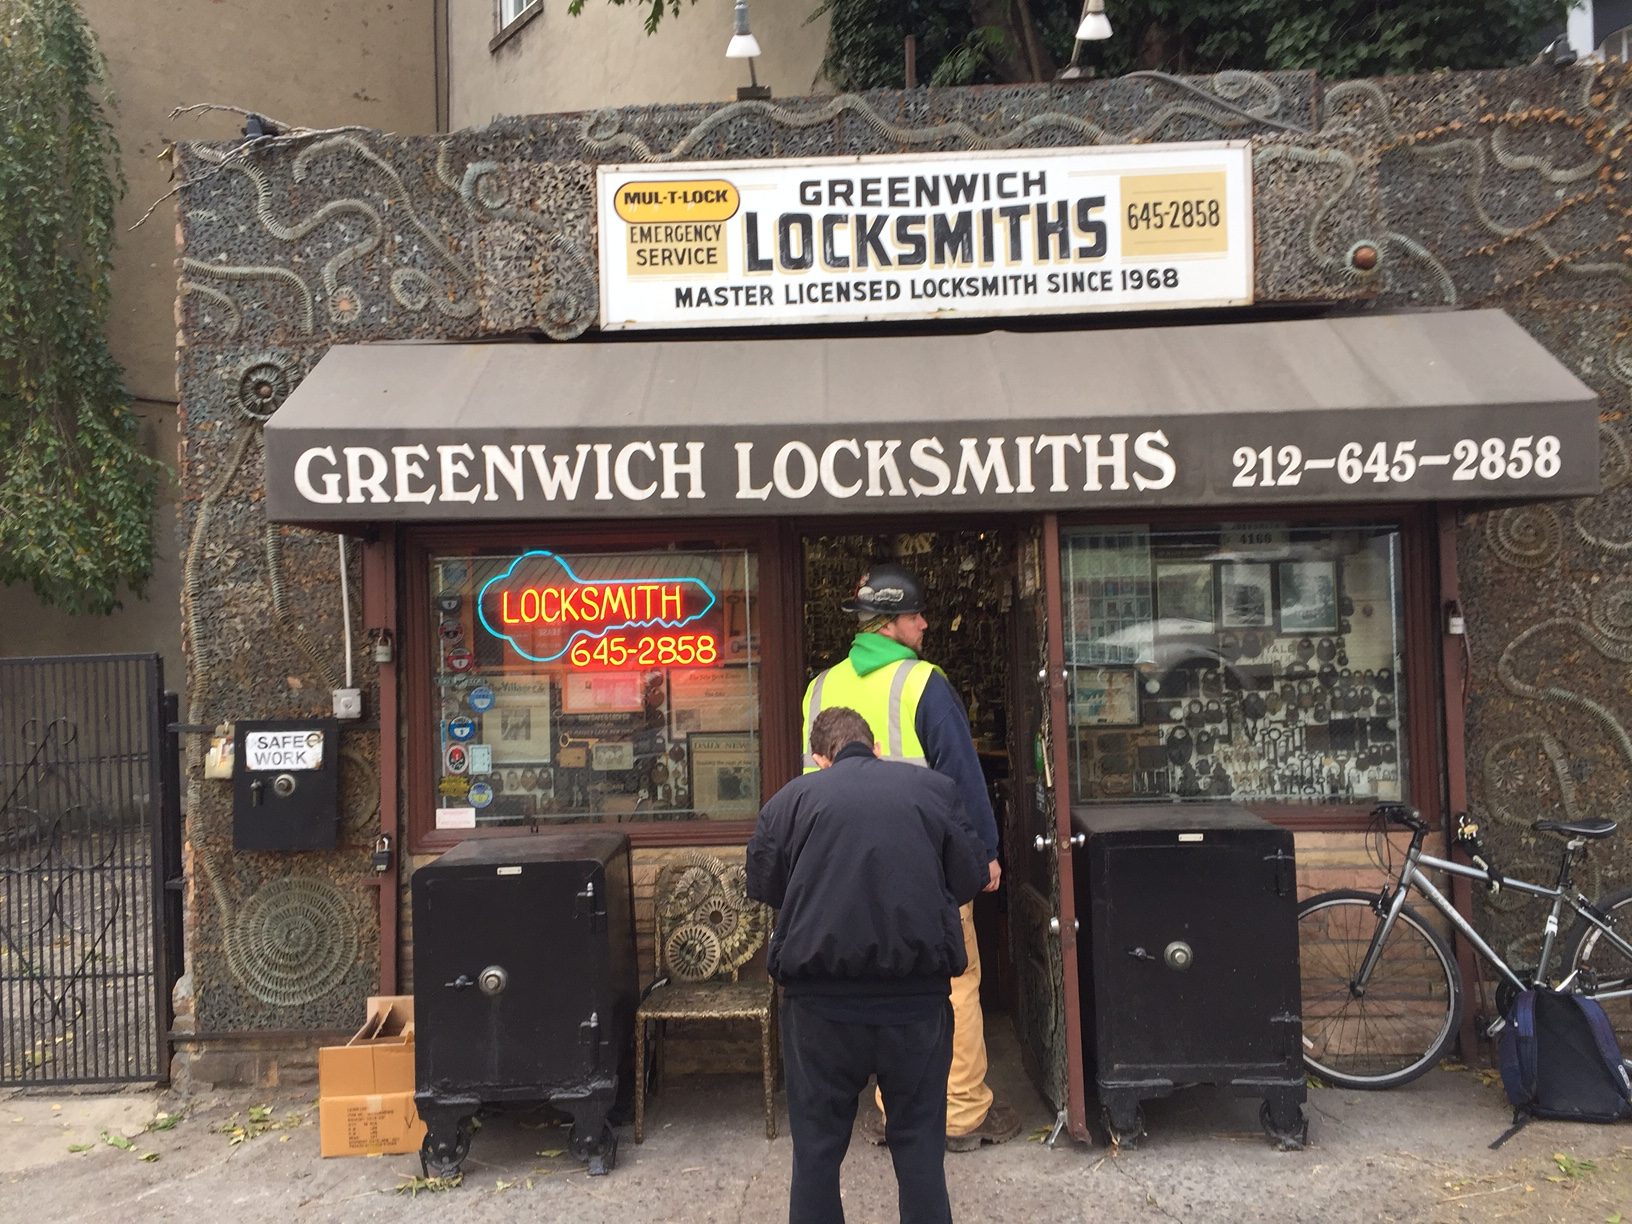 image of tiny Greenwich Locksmiths storefront in New York City